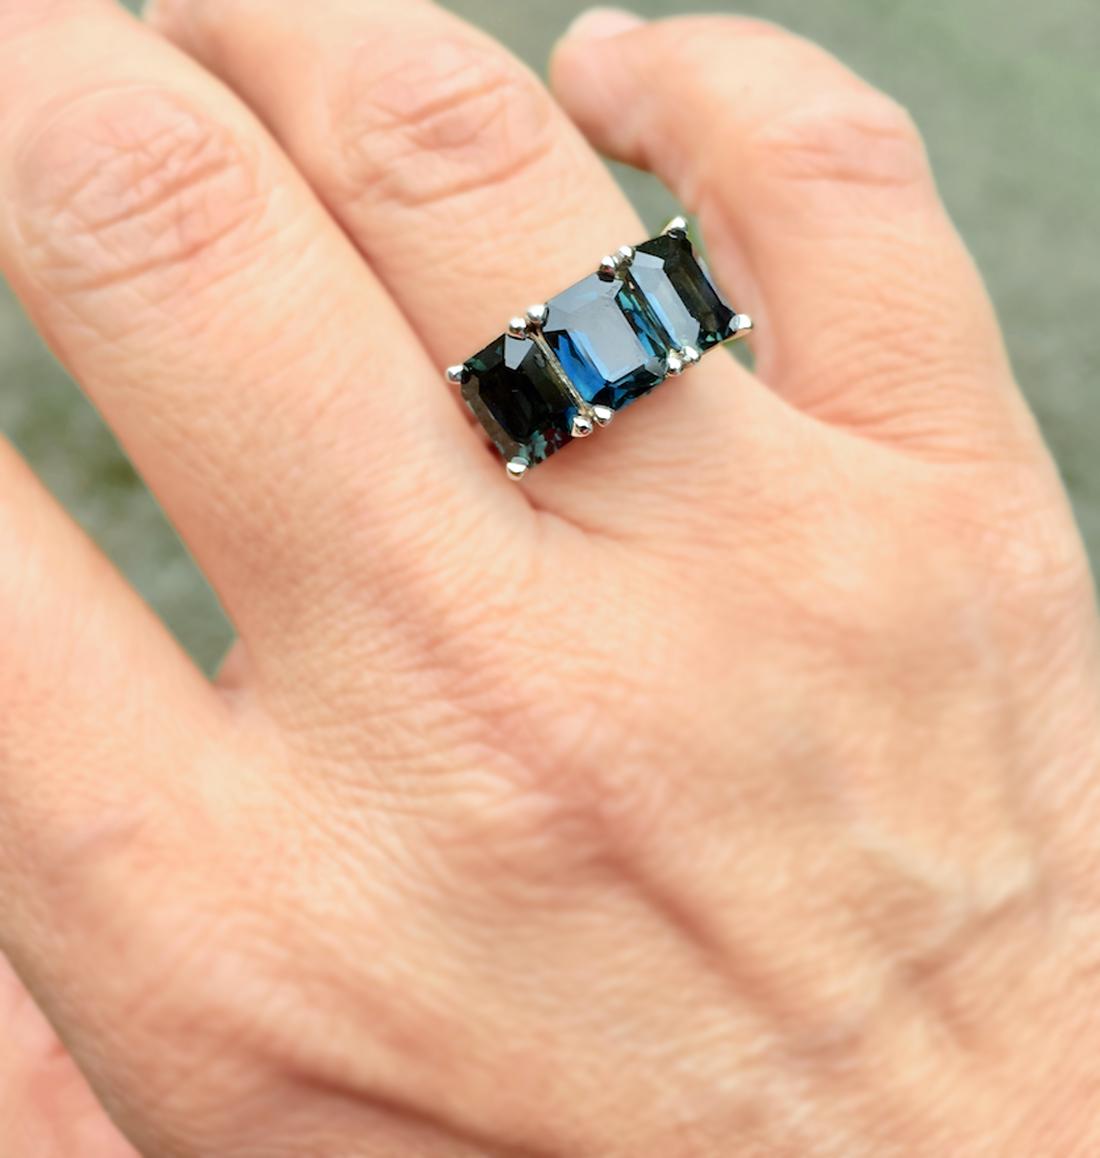 A three perfectly matched contemporary stylish Natural Sapphire three-stone wedding engagement ring unheated emerald-cut Sapphire, displaying a most unique dark teal, greenish blue color. All 3 Sapphires emerald cut with an approximate combined